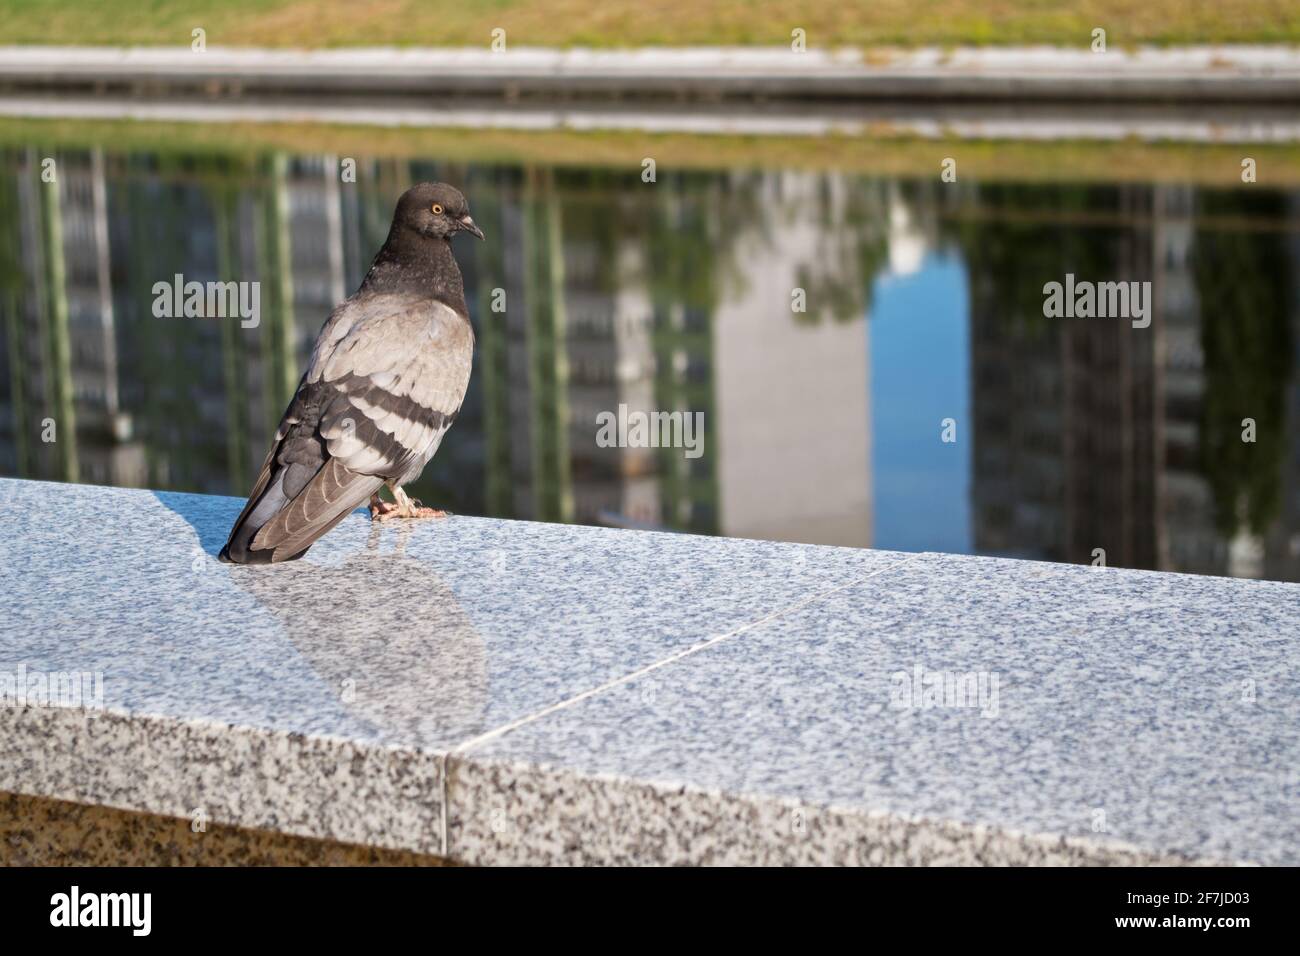 A bluish-gray urban pigeon looking curiously and sitting on the edge of the speckled gray-white marble parapet of the embankment by the river with hig Stock Photo